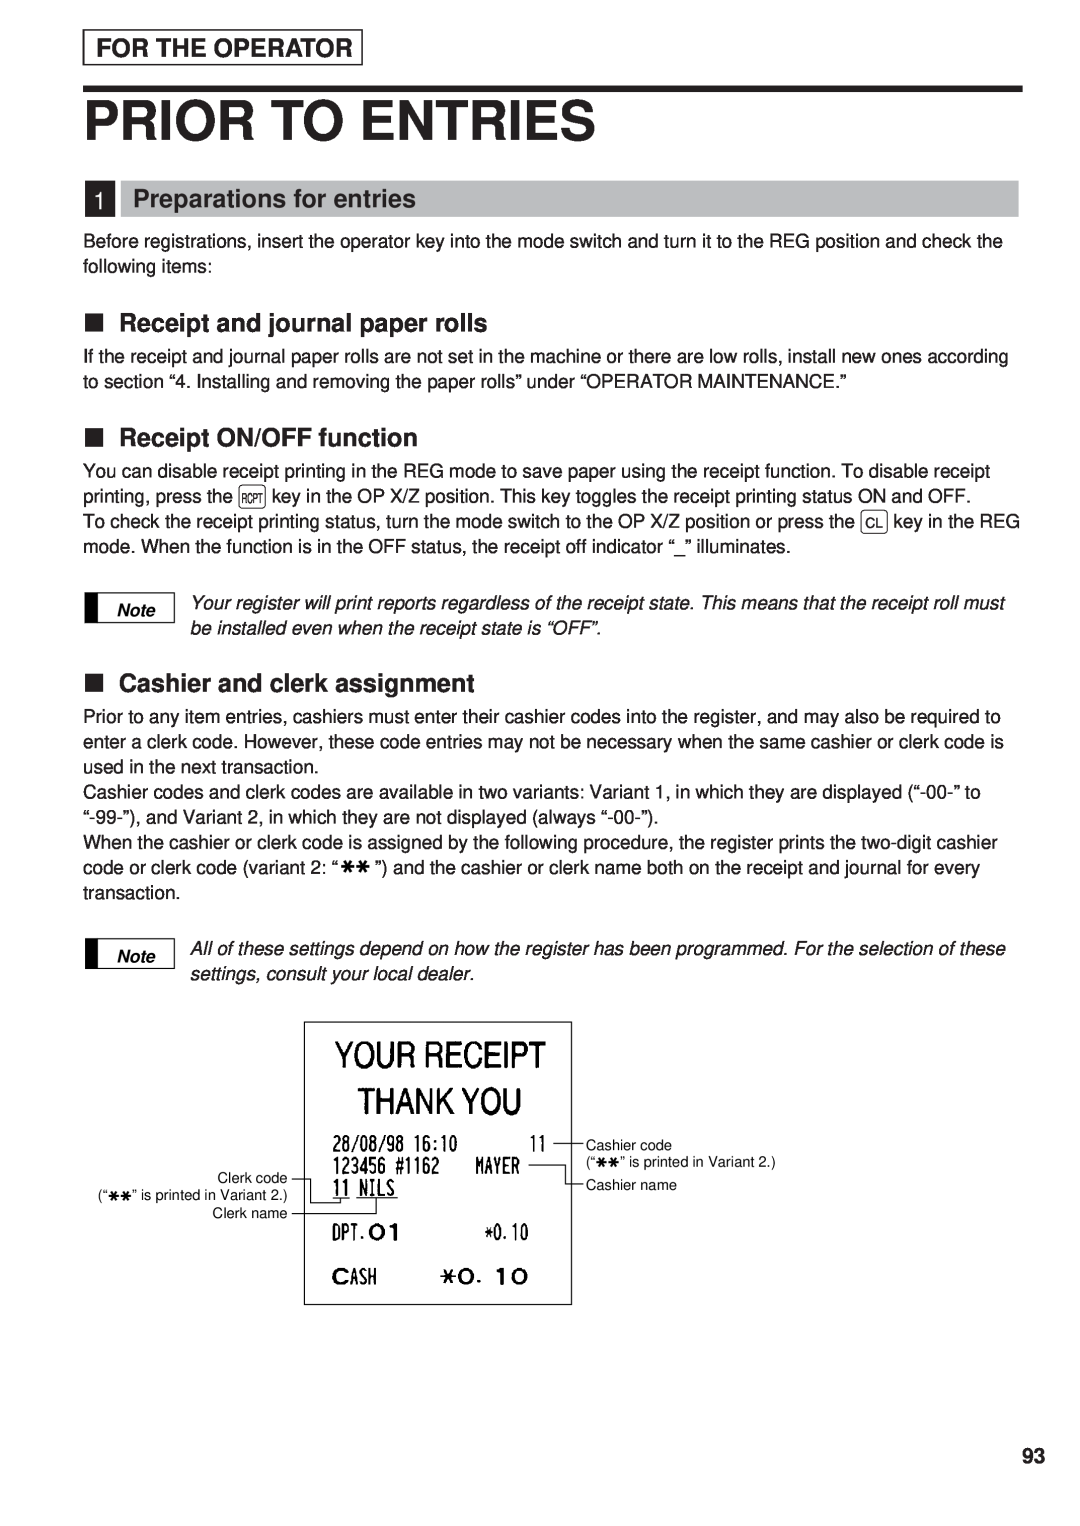 Sharp ER-A450 Prior To Entries, For The Operator, Preparations for entries, Receipt and journal paper rolls 